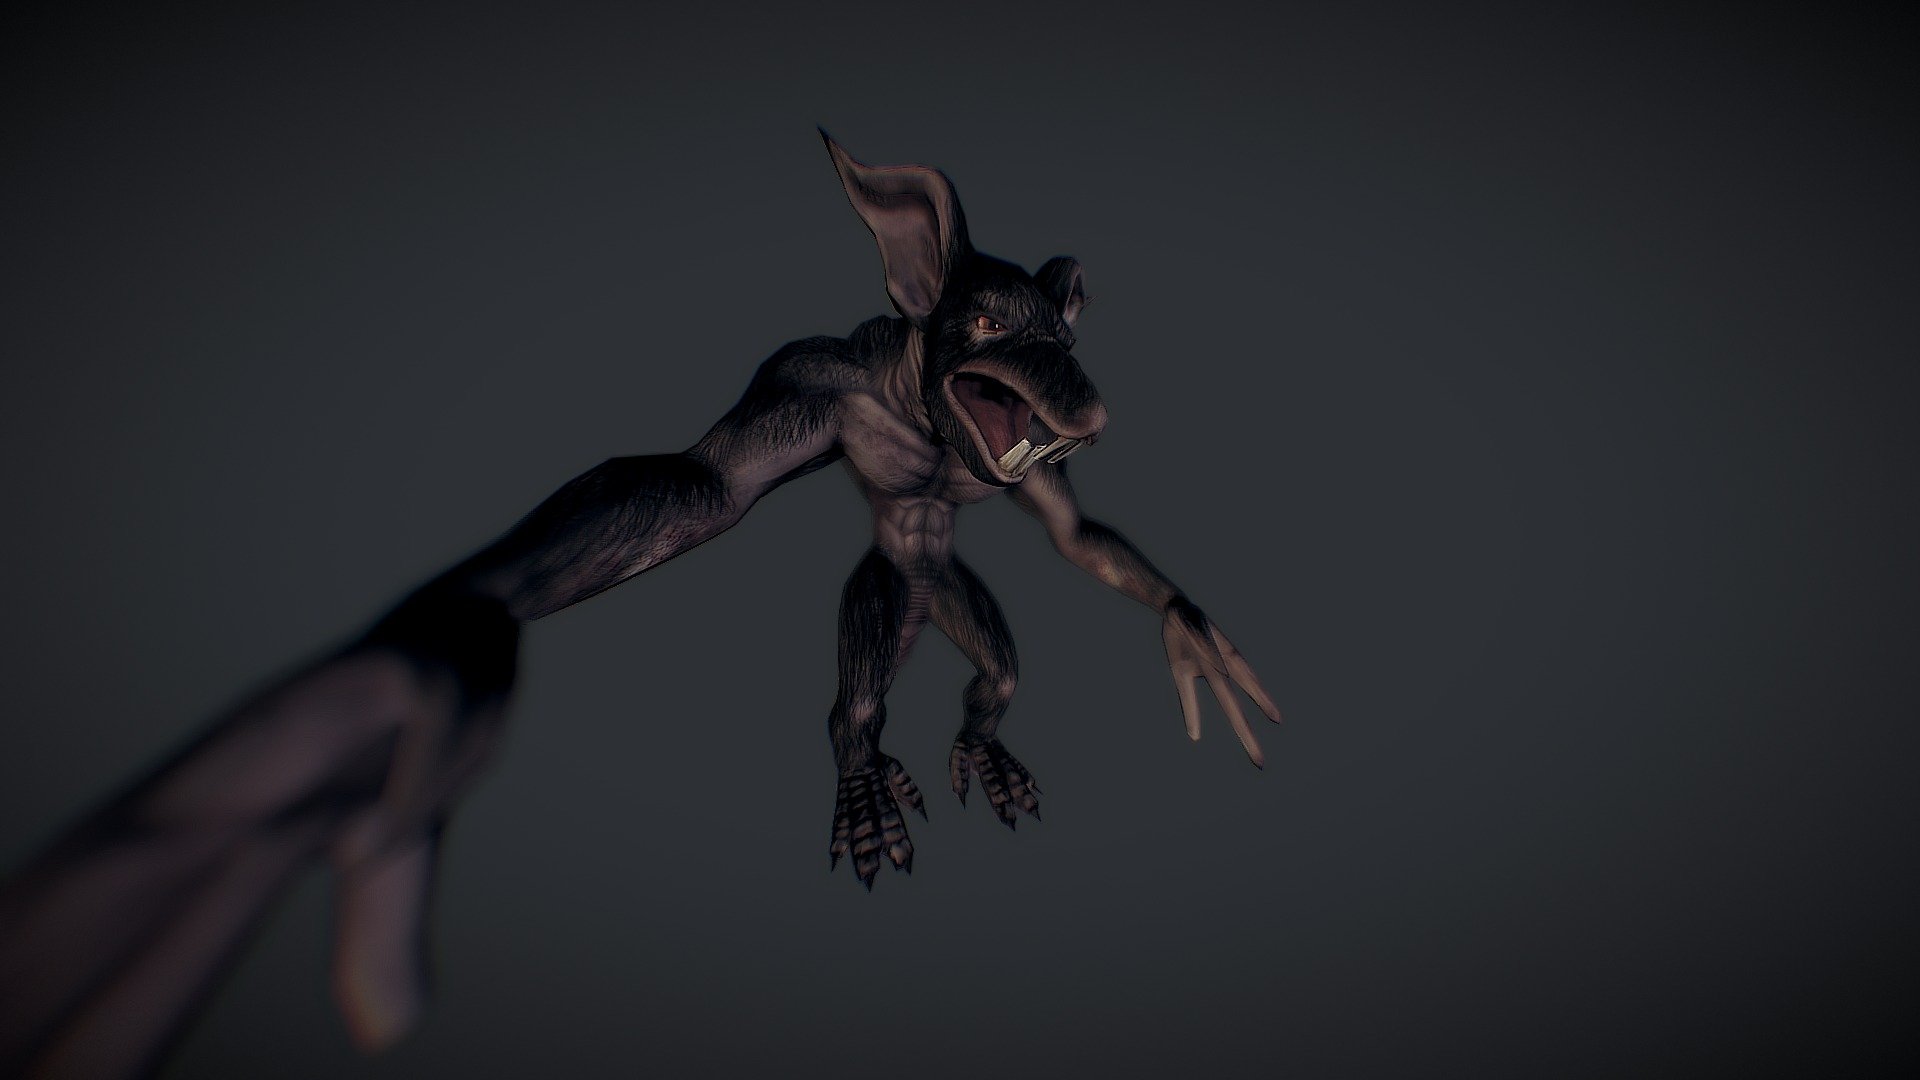 Model created for the dark level of the game 